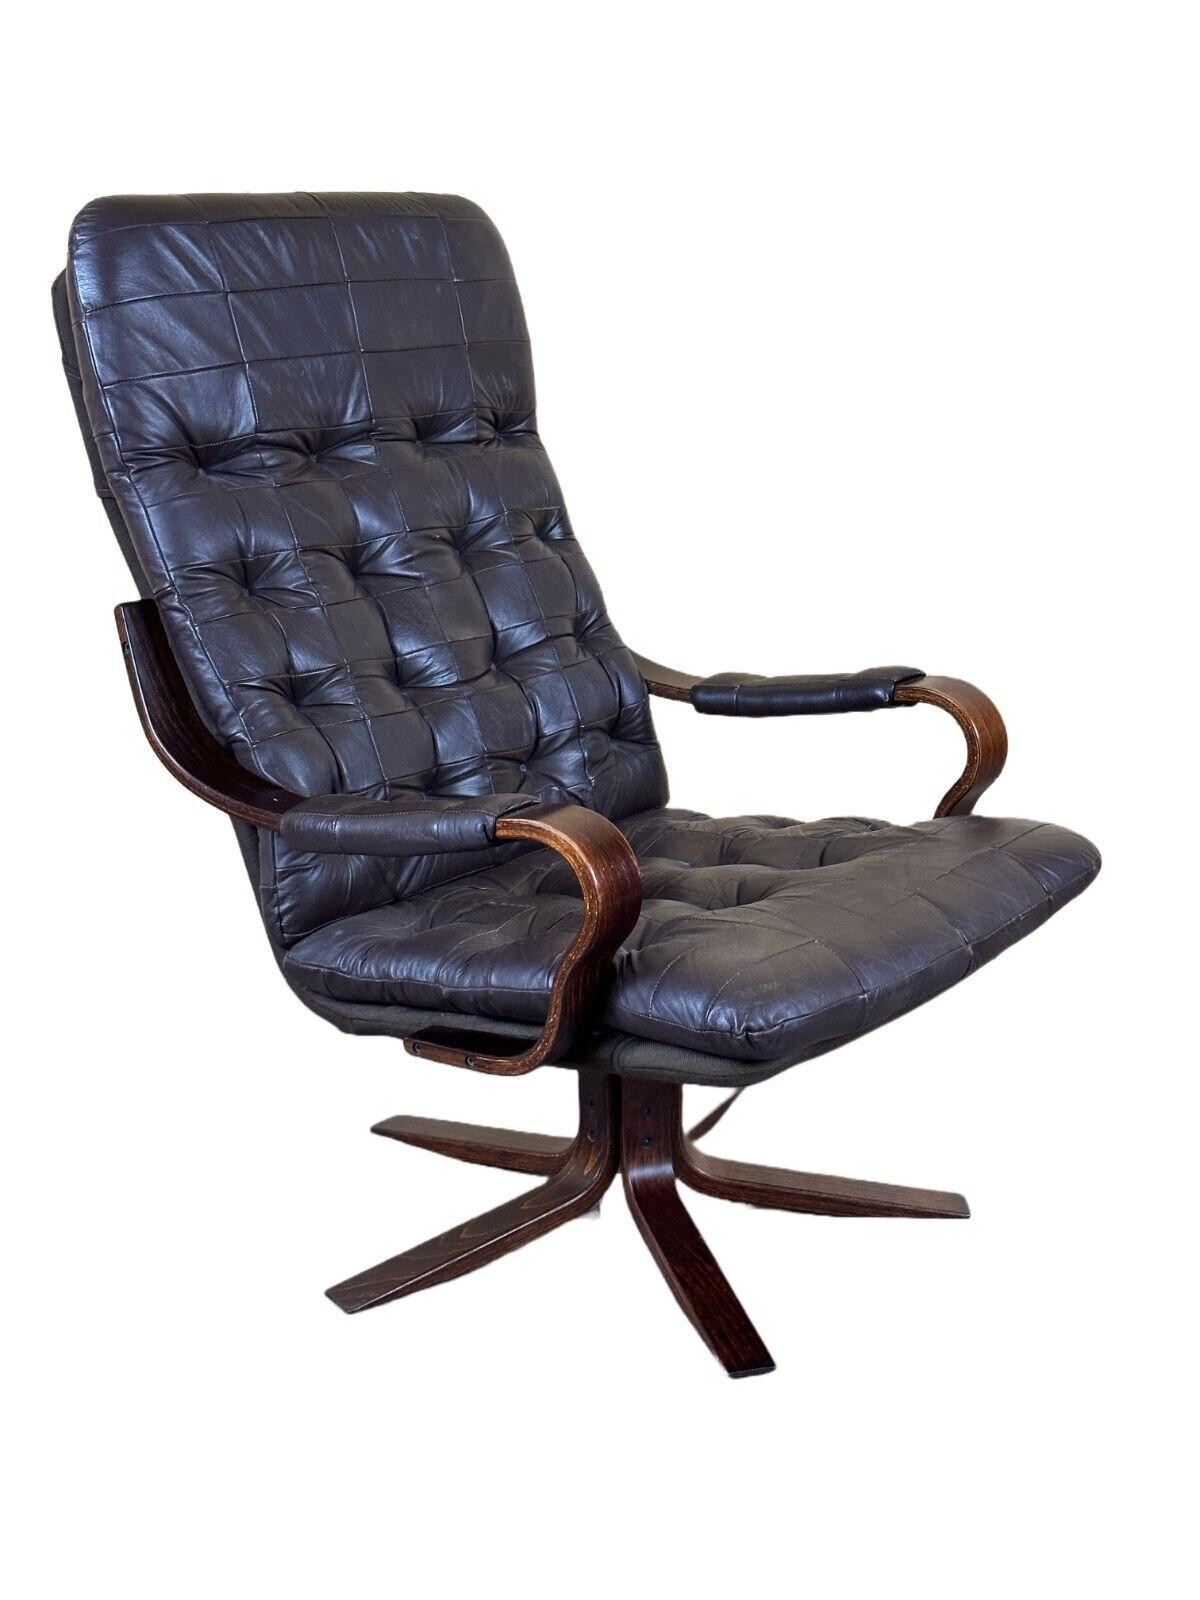 60s 70s armchair Easy Chair leather armchair swivel armchair Danish Modern Design

Object: Easy Chair

Manufacturer:

Condition: good - vintage

Age: around 1960-1970

Dimensions:

Width = 68cm
Depth = 88cm
Height = 100cm
Seat height =